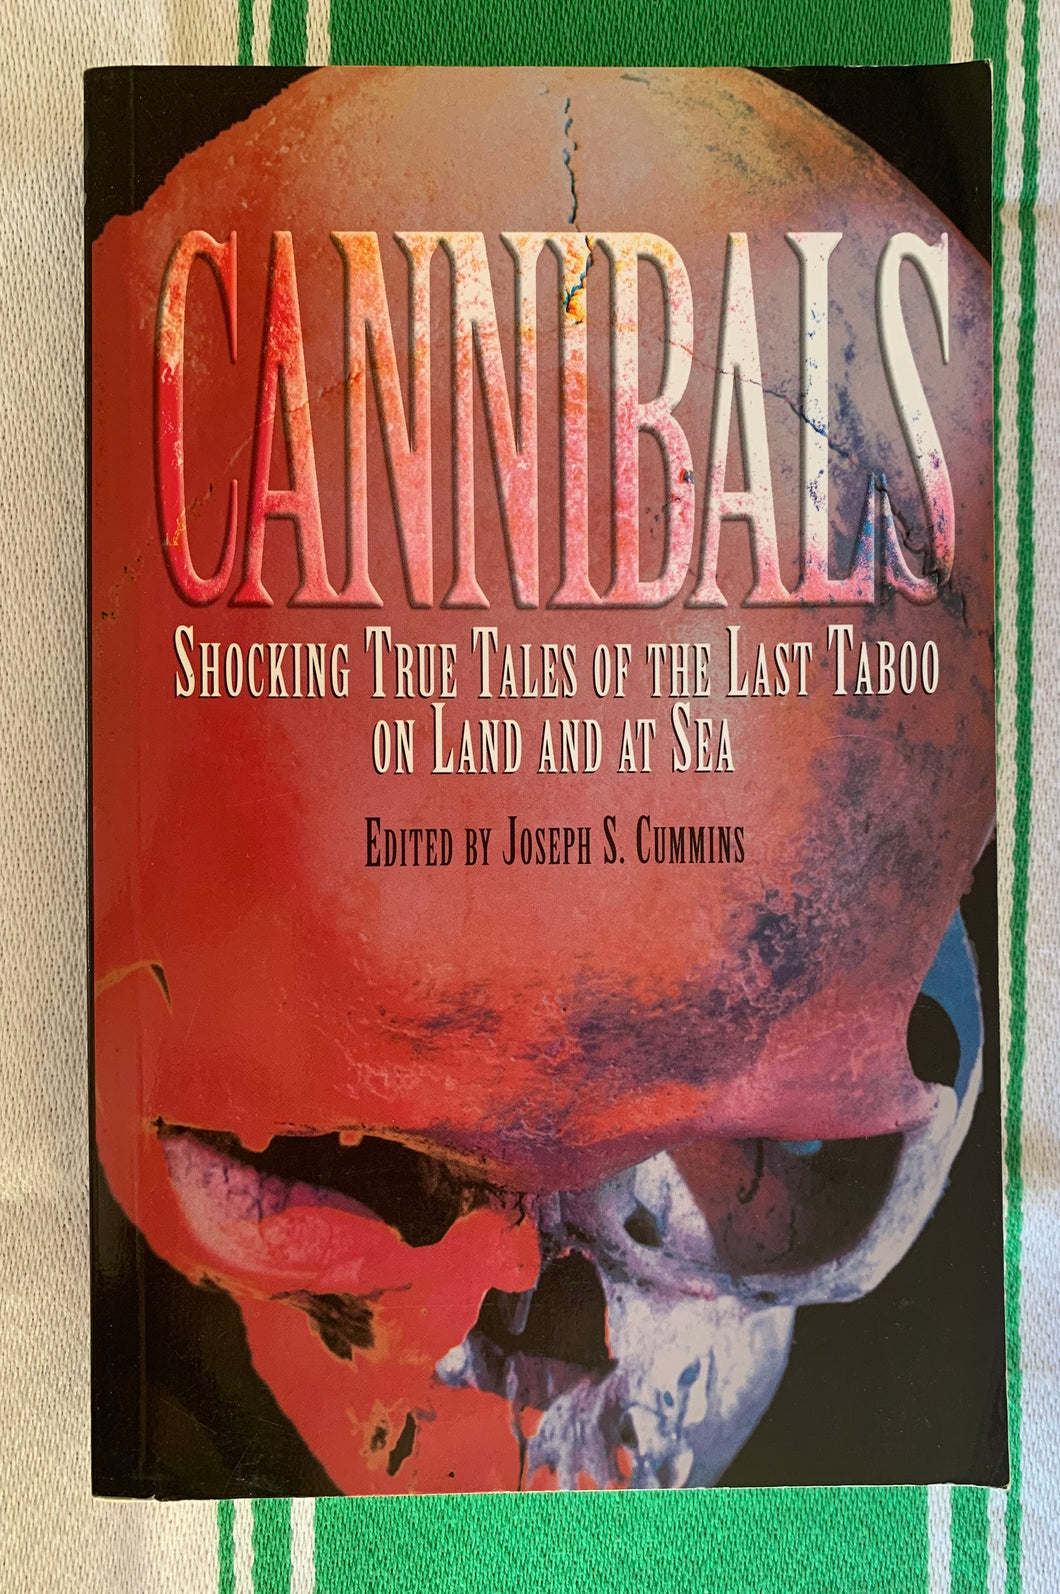 Cannibals: Shocking True Tales of the Last Taboo on Land and at Sea